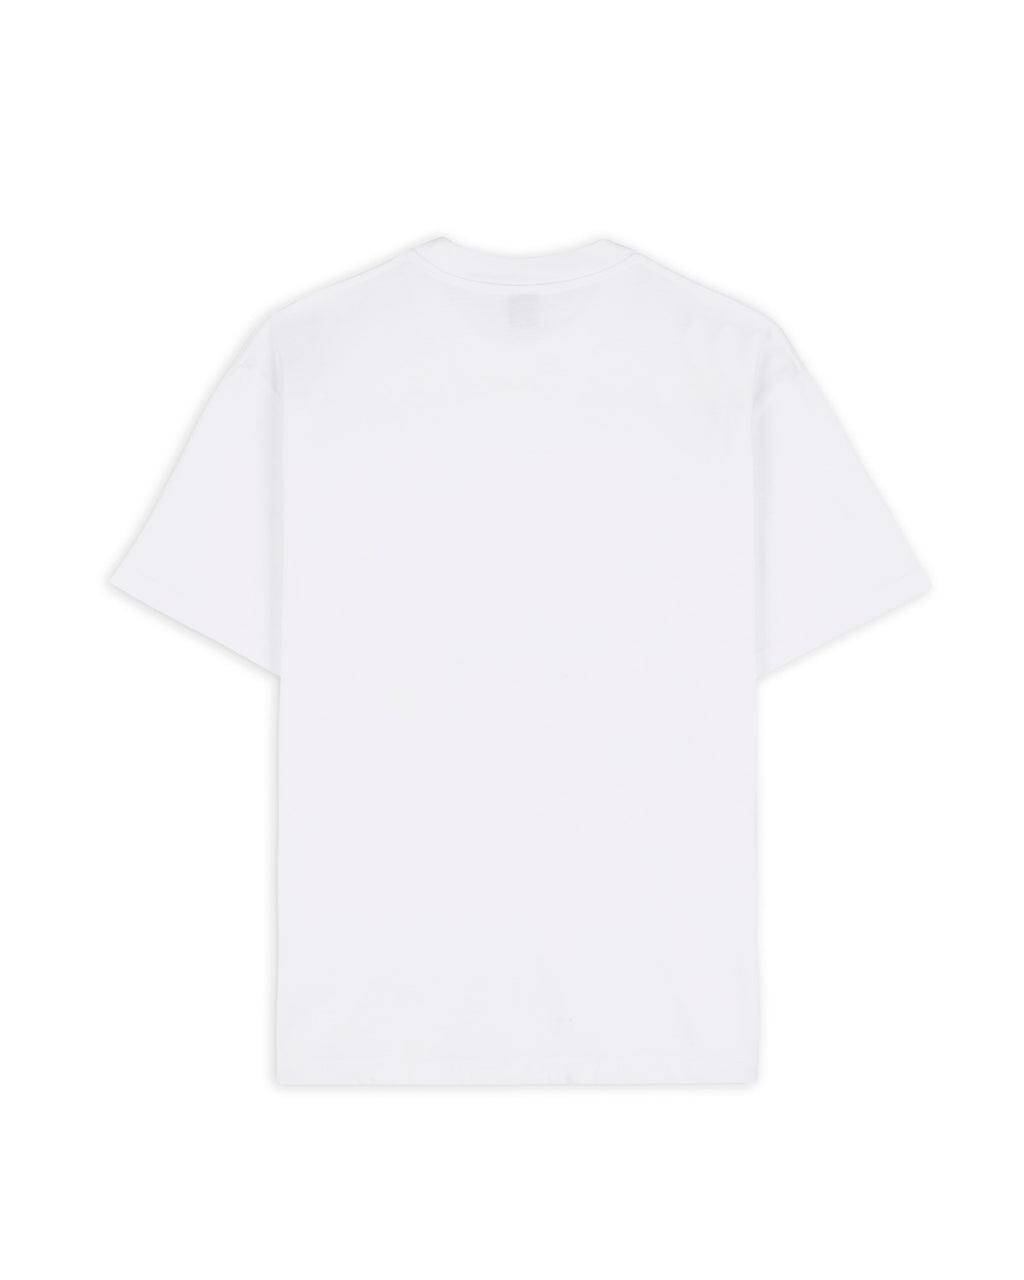 End of Days T-Shirt - White 2